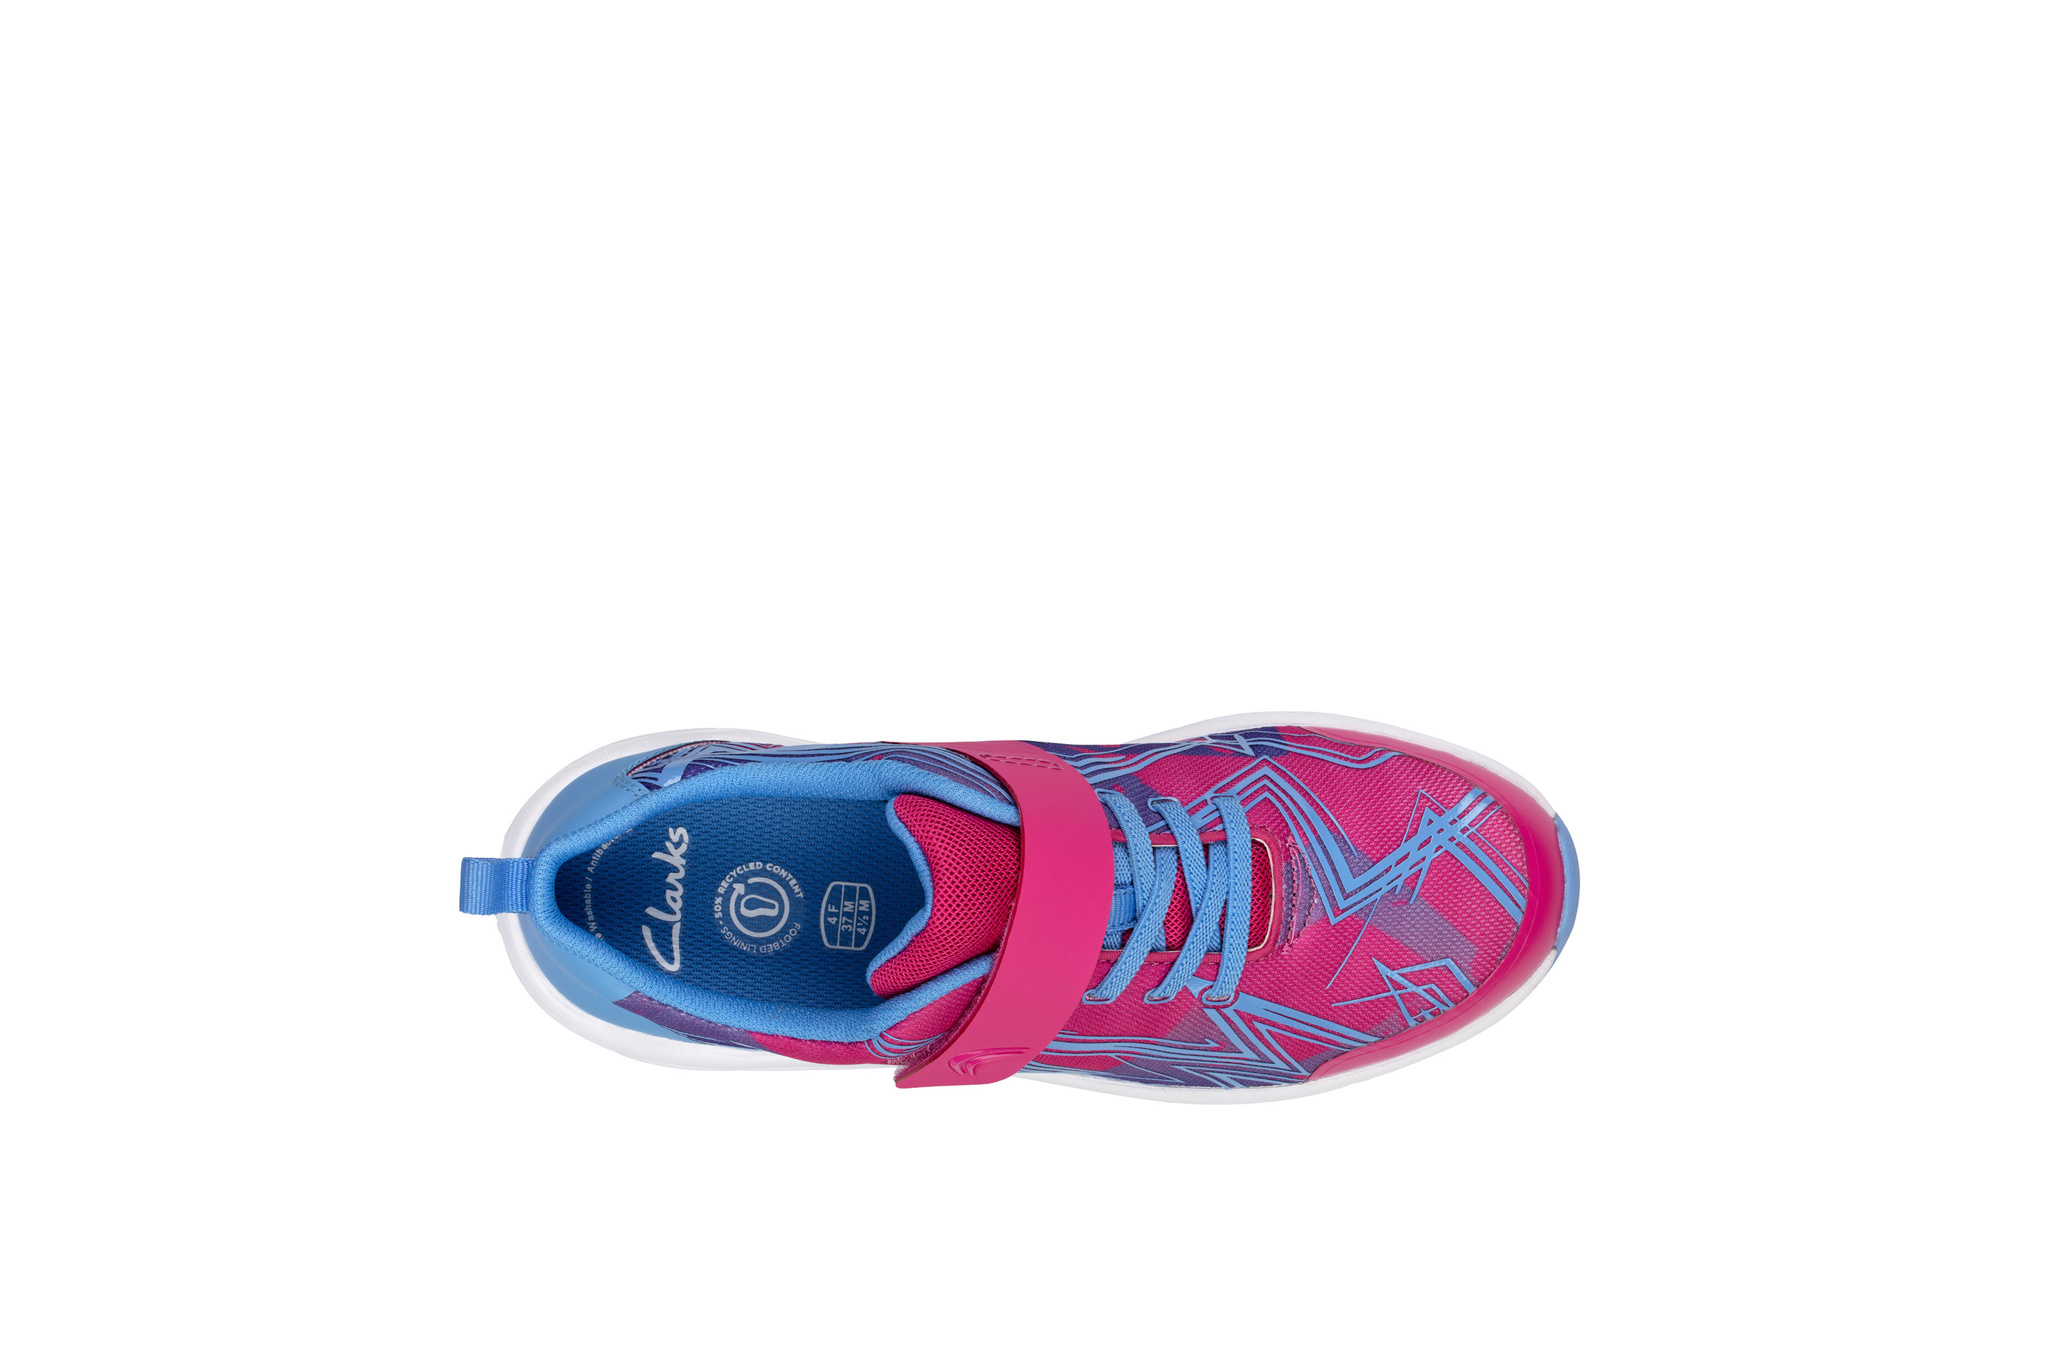 Clarks Aeon Pace Pink Combi Youth